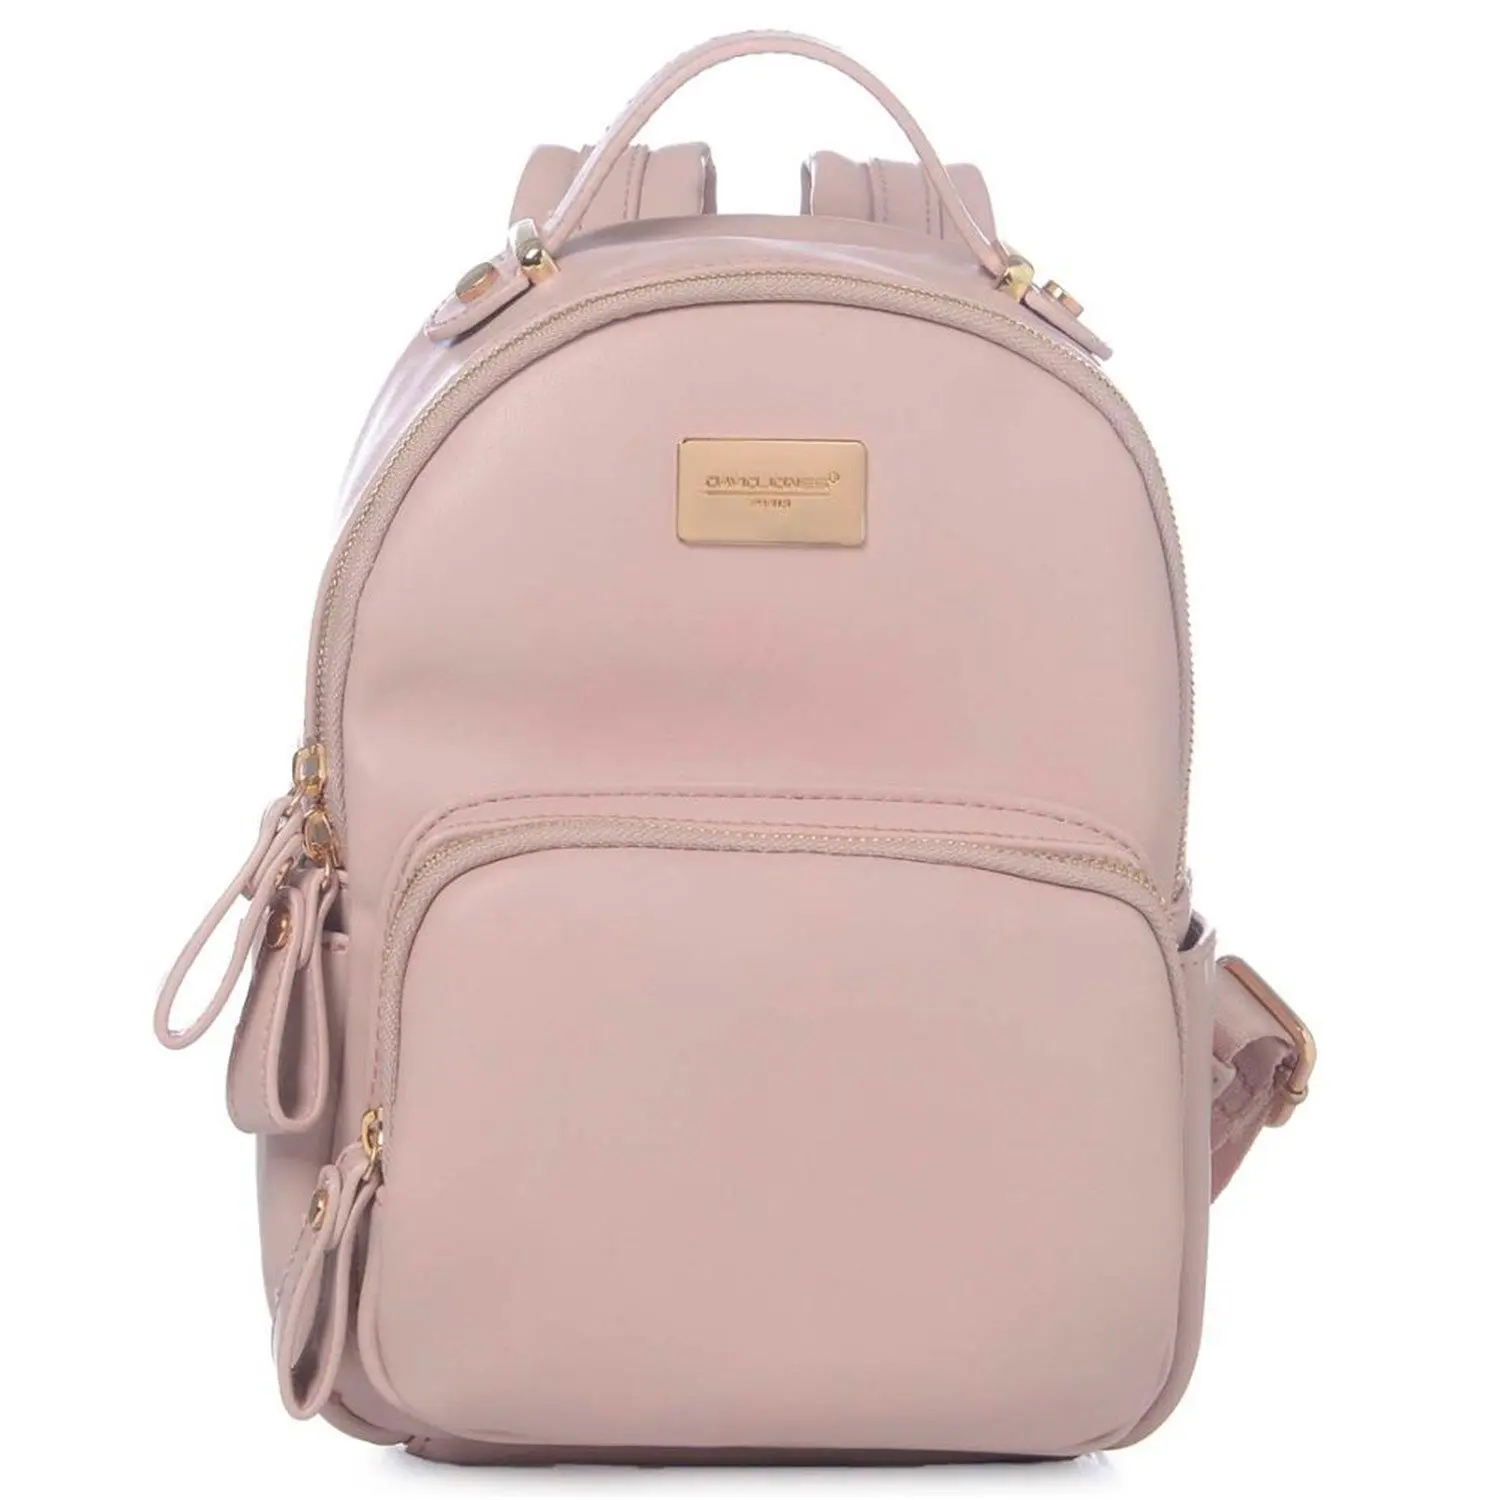 Cheap Ladies College Bags, find Ladies College Bags deals on line at ...